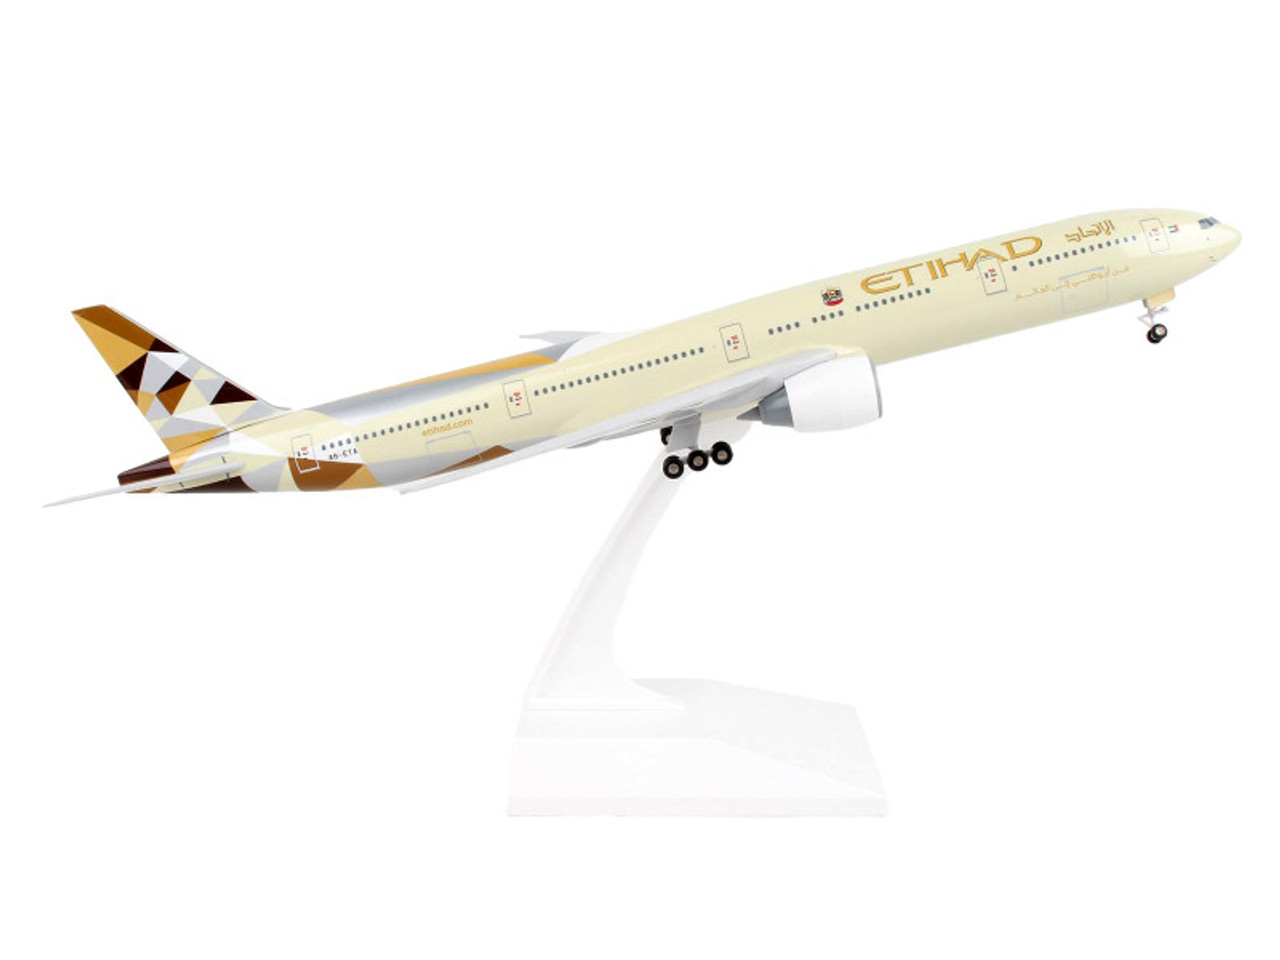 Boeing 777-300ER Commercial Aircraft with Landing Gear "Etihad Airways" (A6-ETA) Beige with Tail Graphics (Snap-Fit) 1/200 Plastic Model by Skymarks